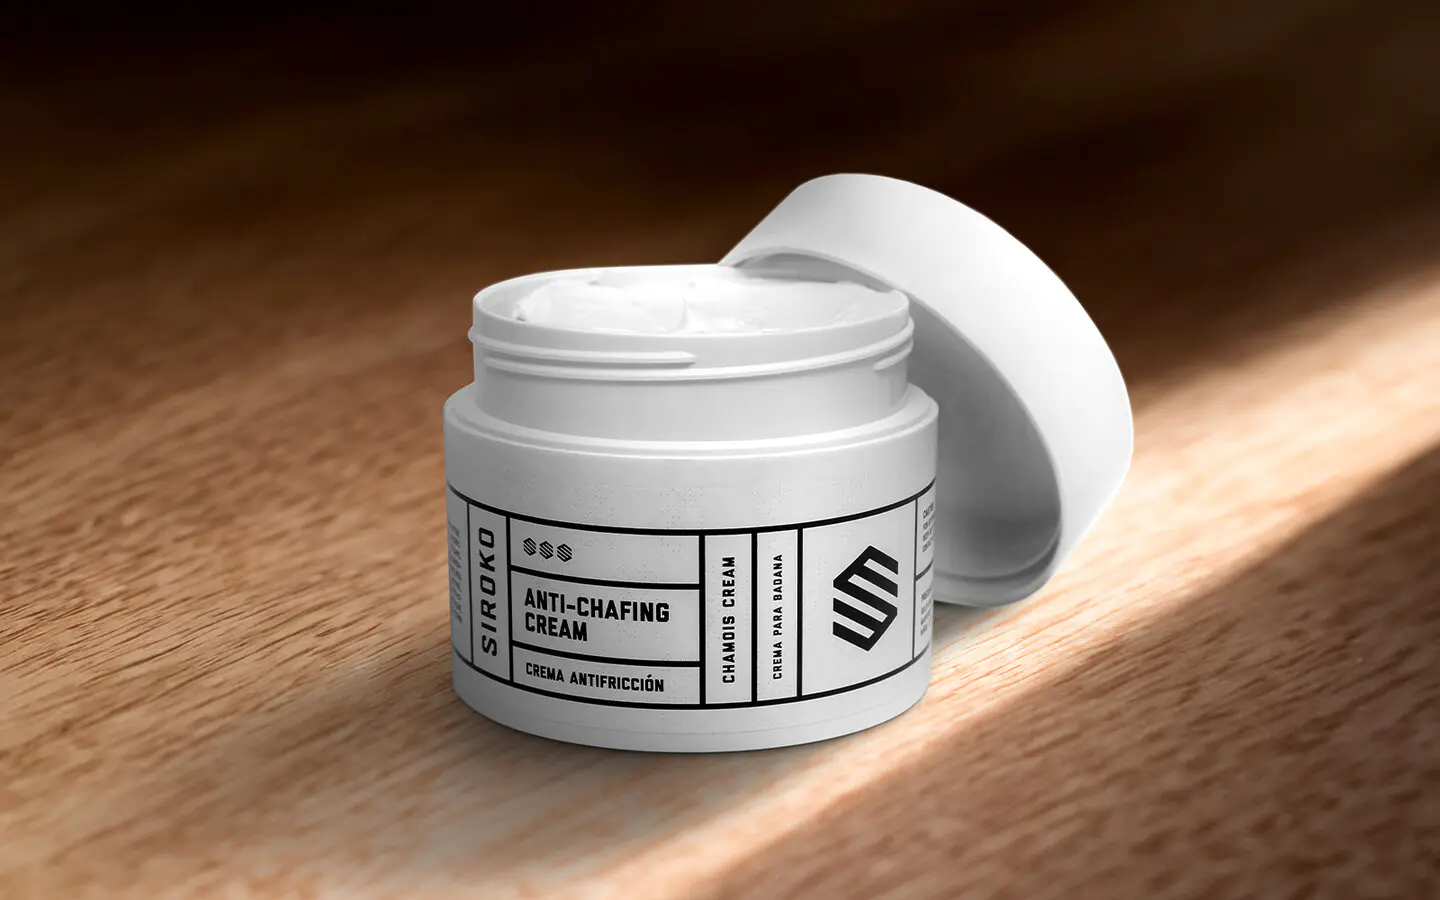 Chamois cream explained - Prevent chafing when cycling - Bullet